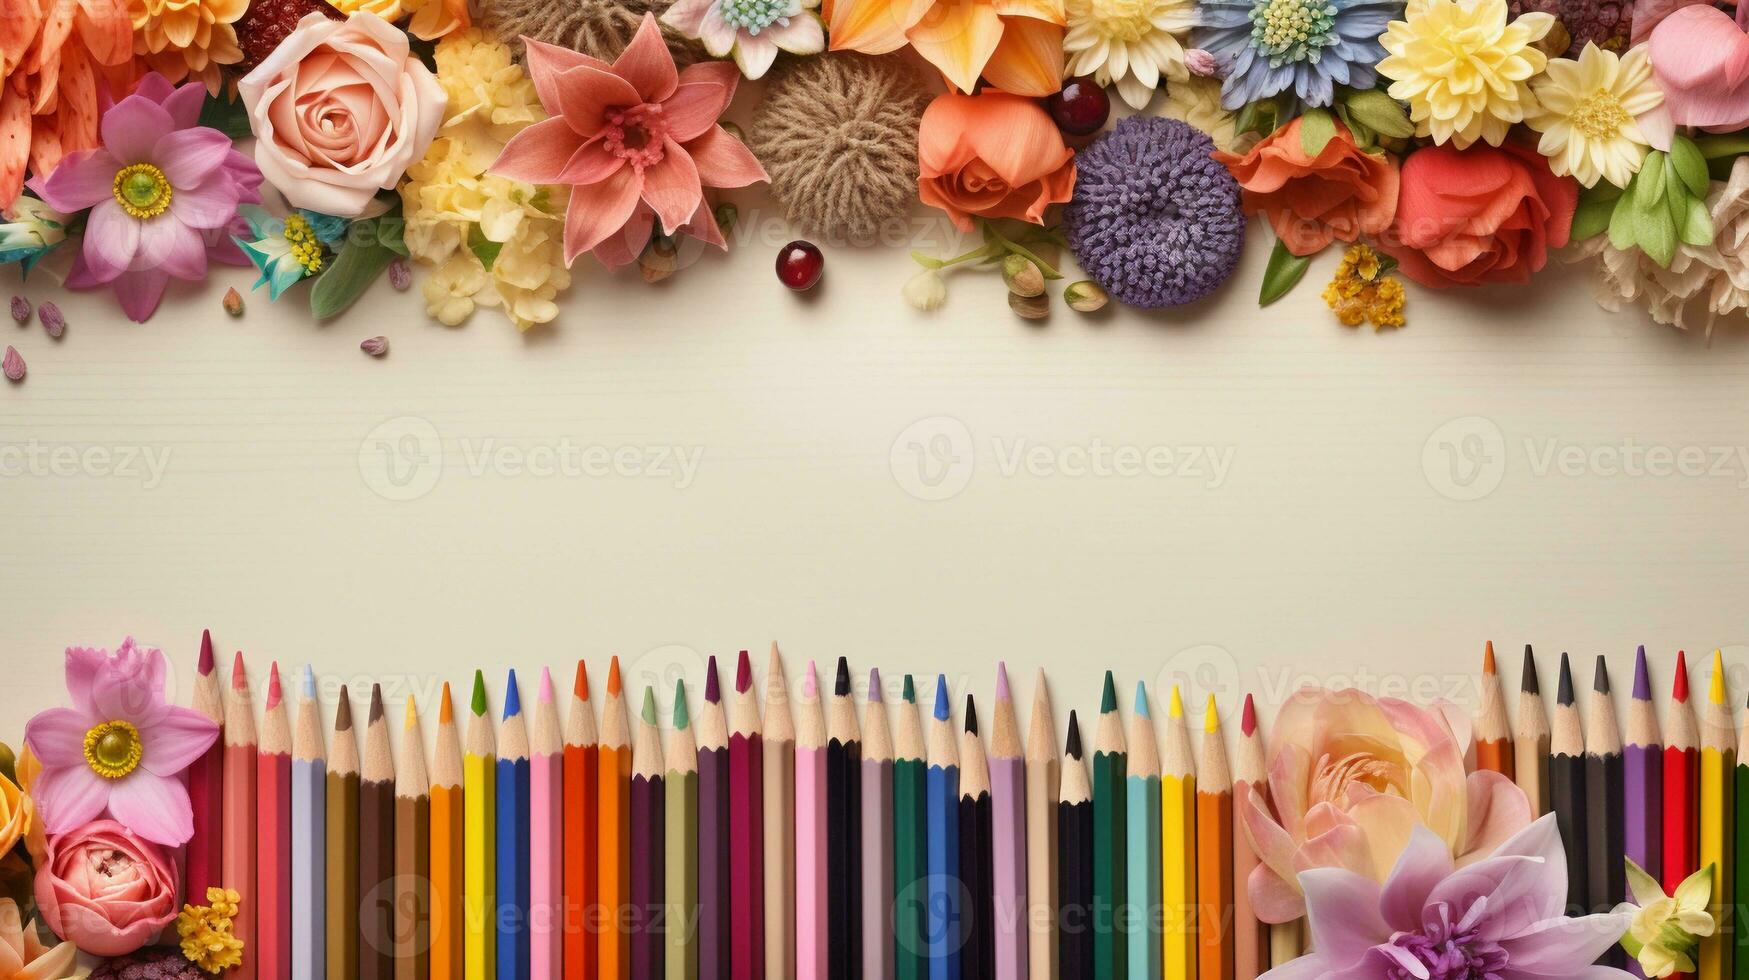 An image featuring color pencils artistically arranged among various types of flowers with space for text in light brown wooden background. AI generated photo